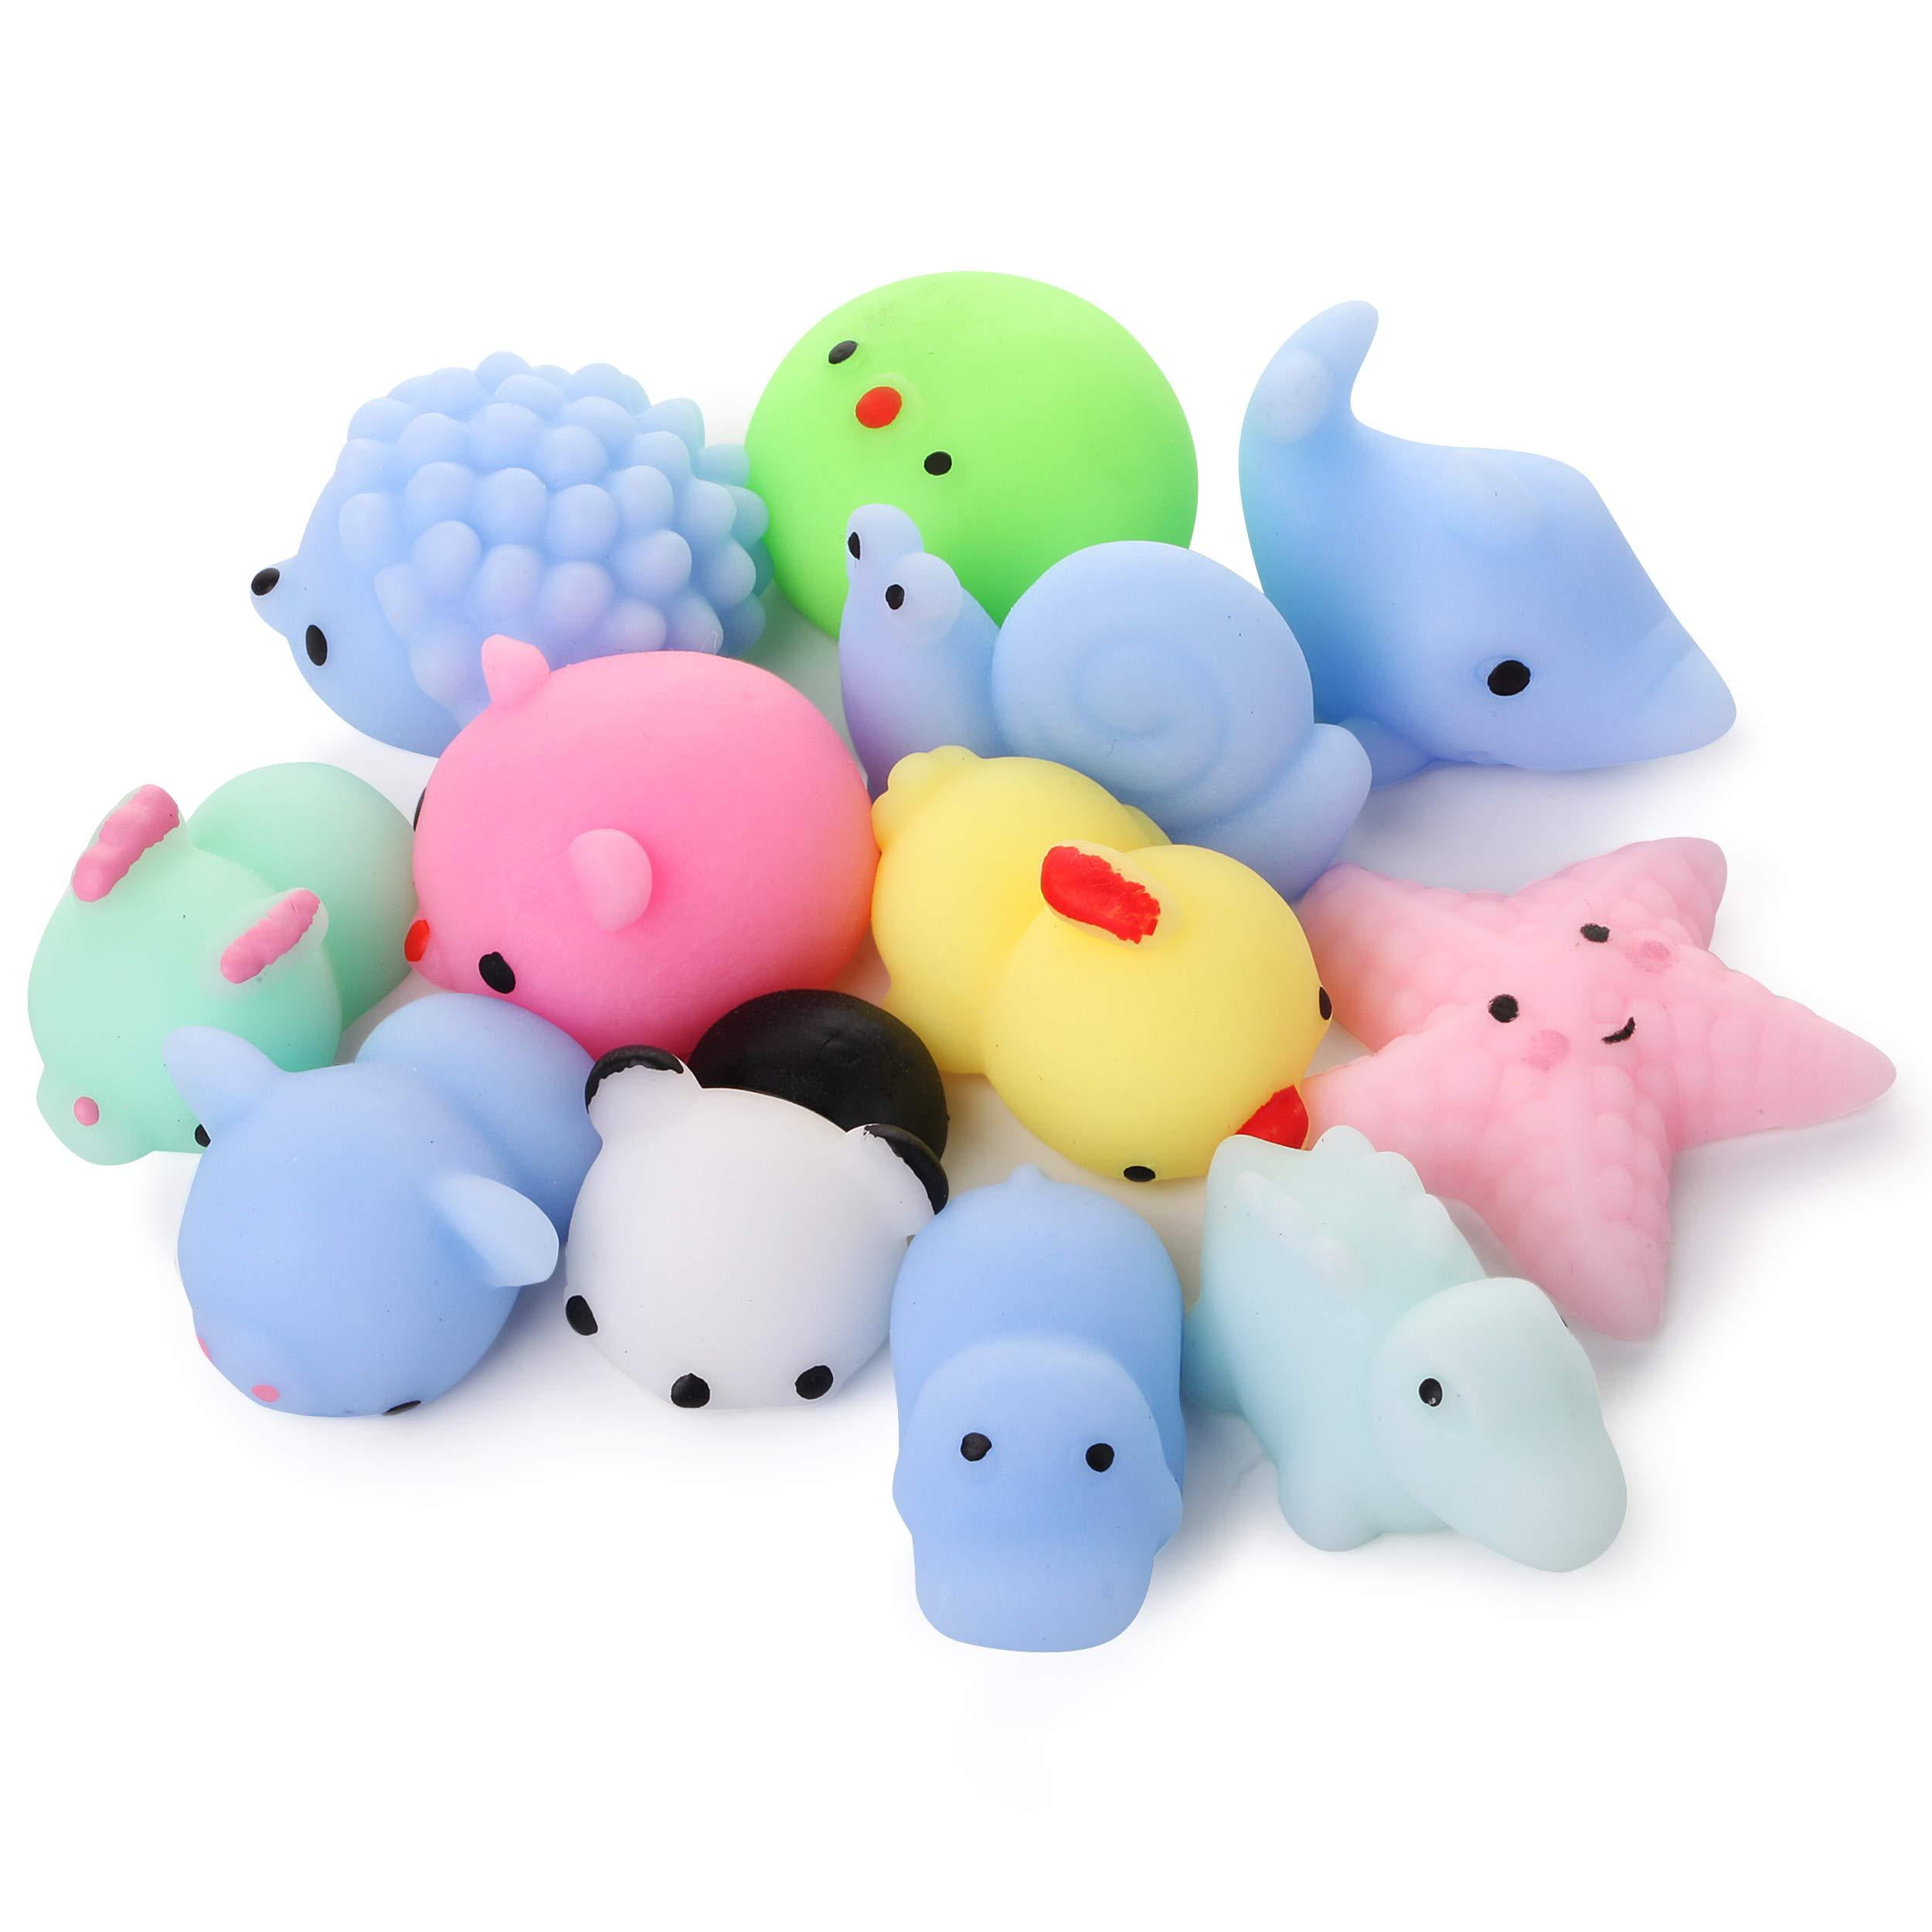 Mr. Pen- Squishy Toys, 12 Pack, Squishy, Squishes for Kids, Squishy Toy,  Squishy Pack, Squishes, Squishy Animals